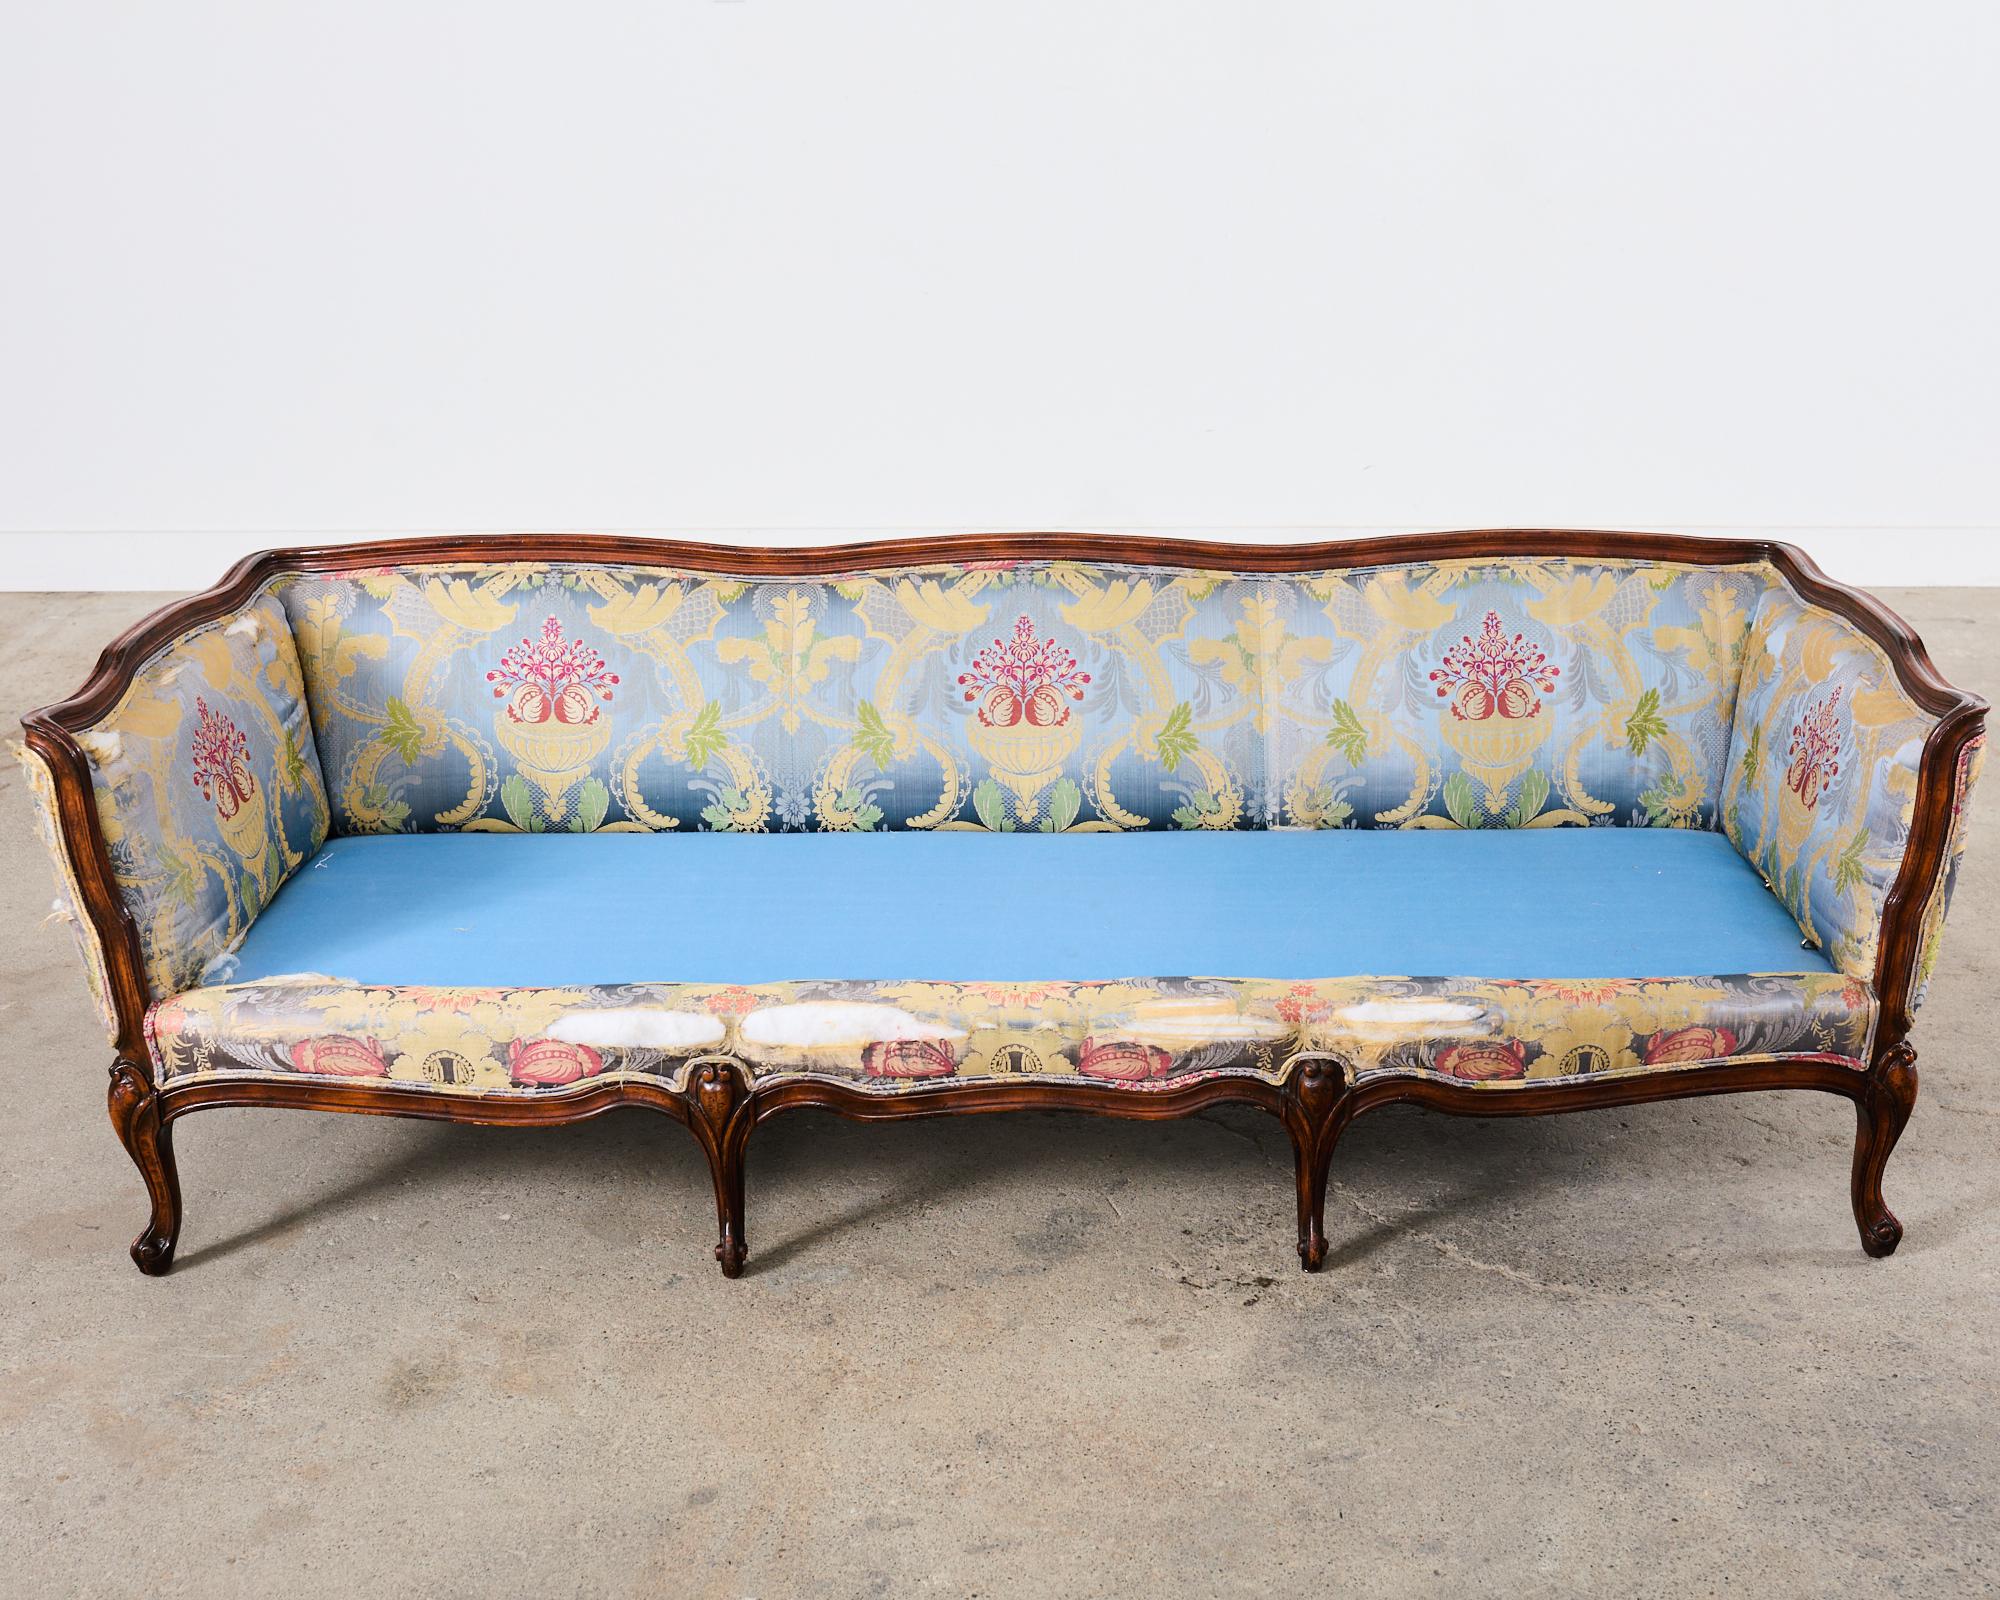 French Provincial Louis XV Style Serpentine Canape Sofa Settee For Sale 13